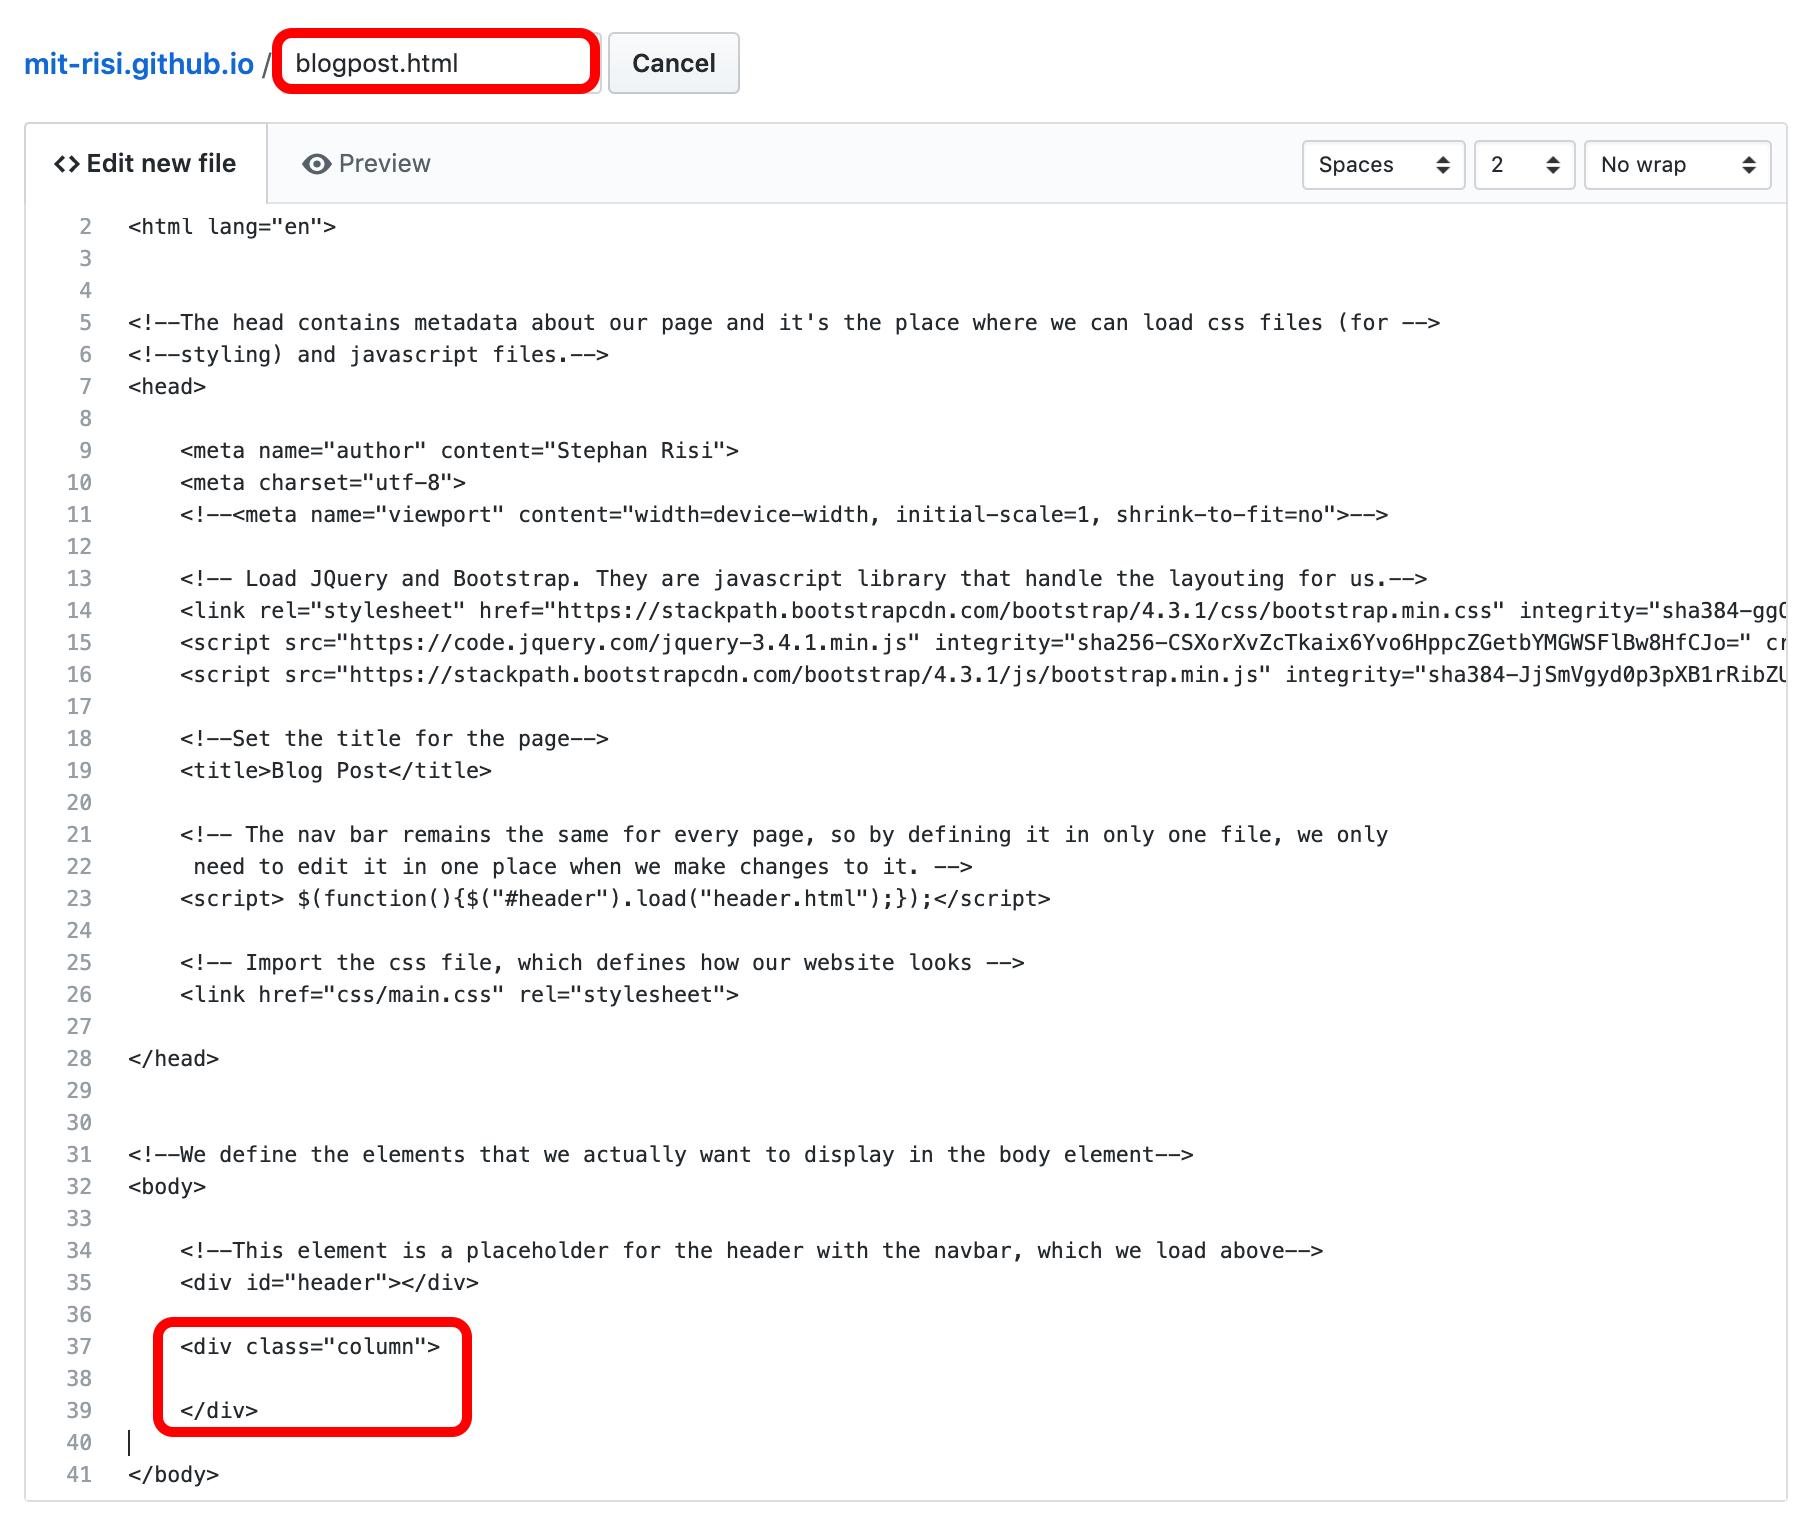 Screenshot of the new blogpost.html with all the boilerplate code from index.html